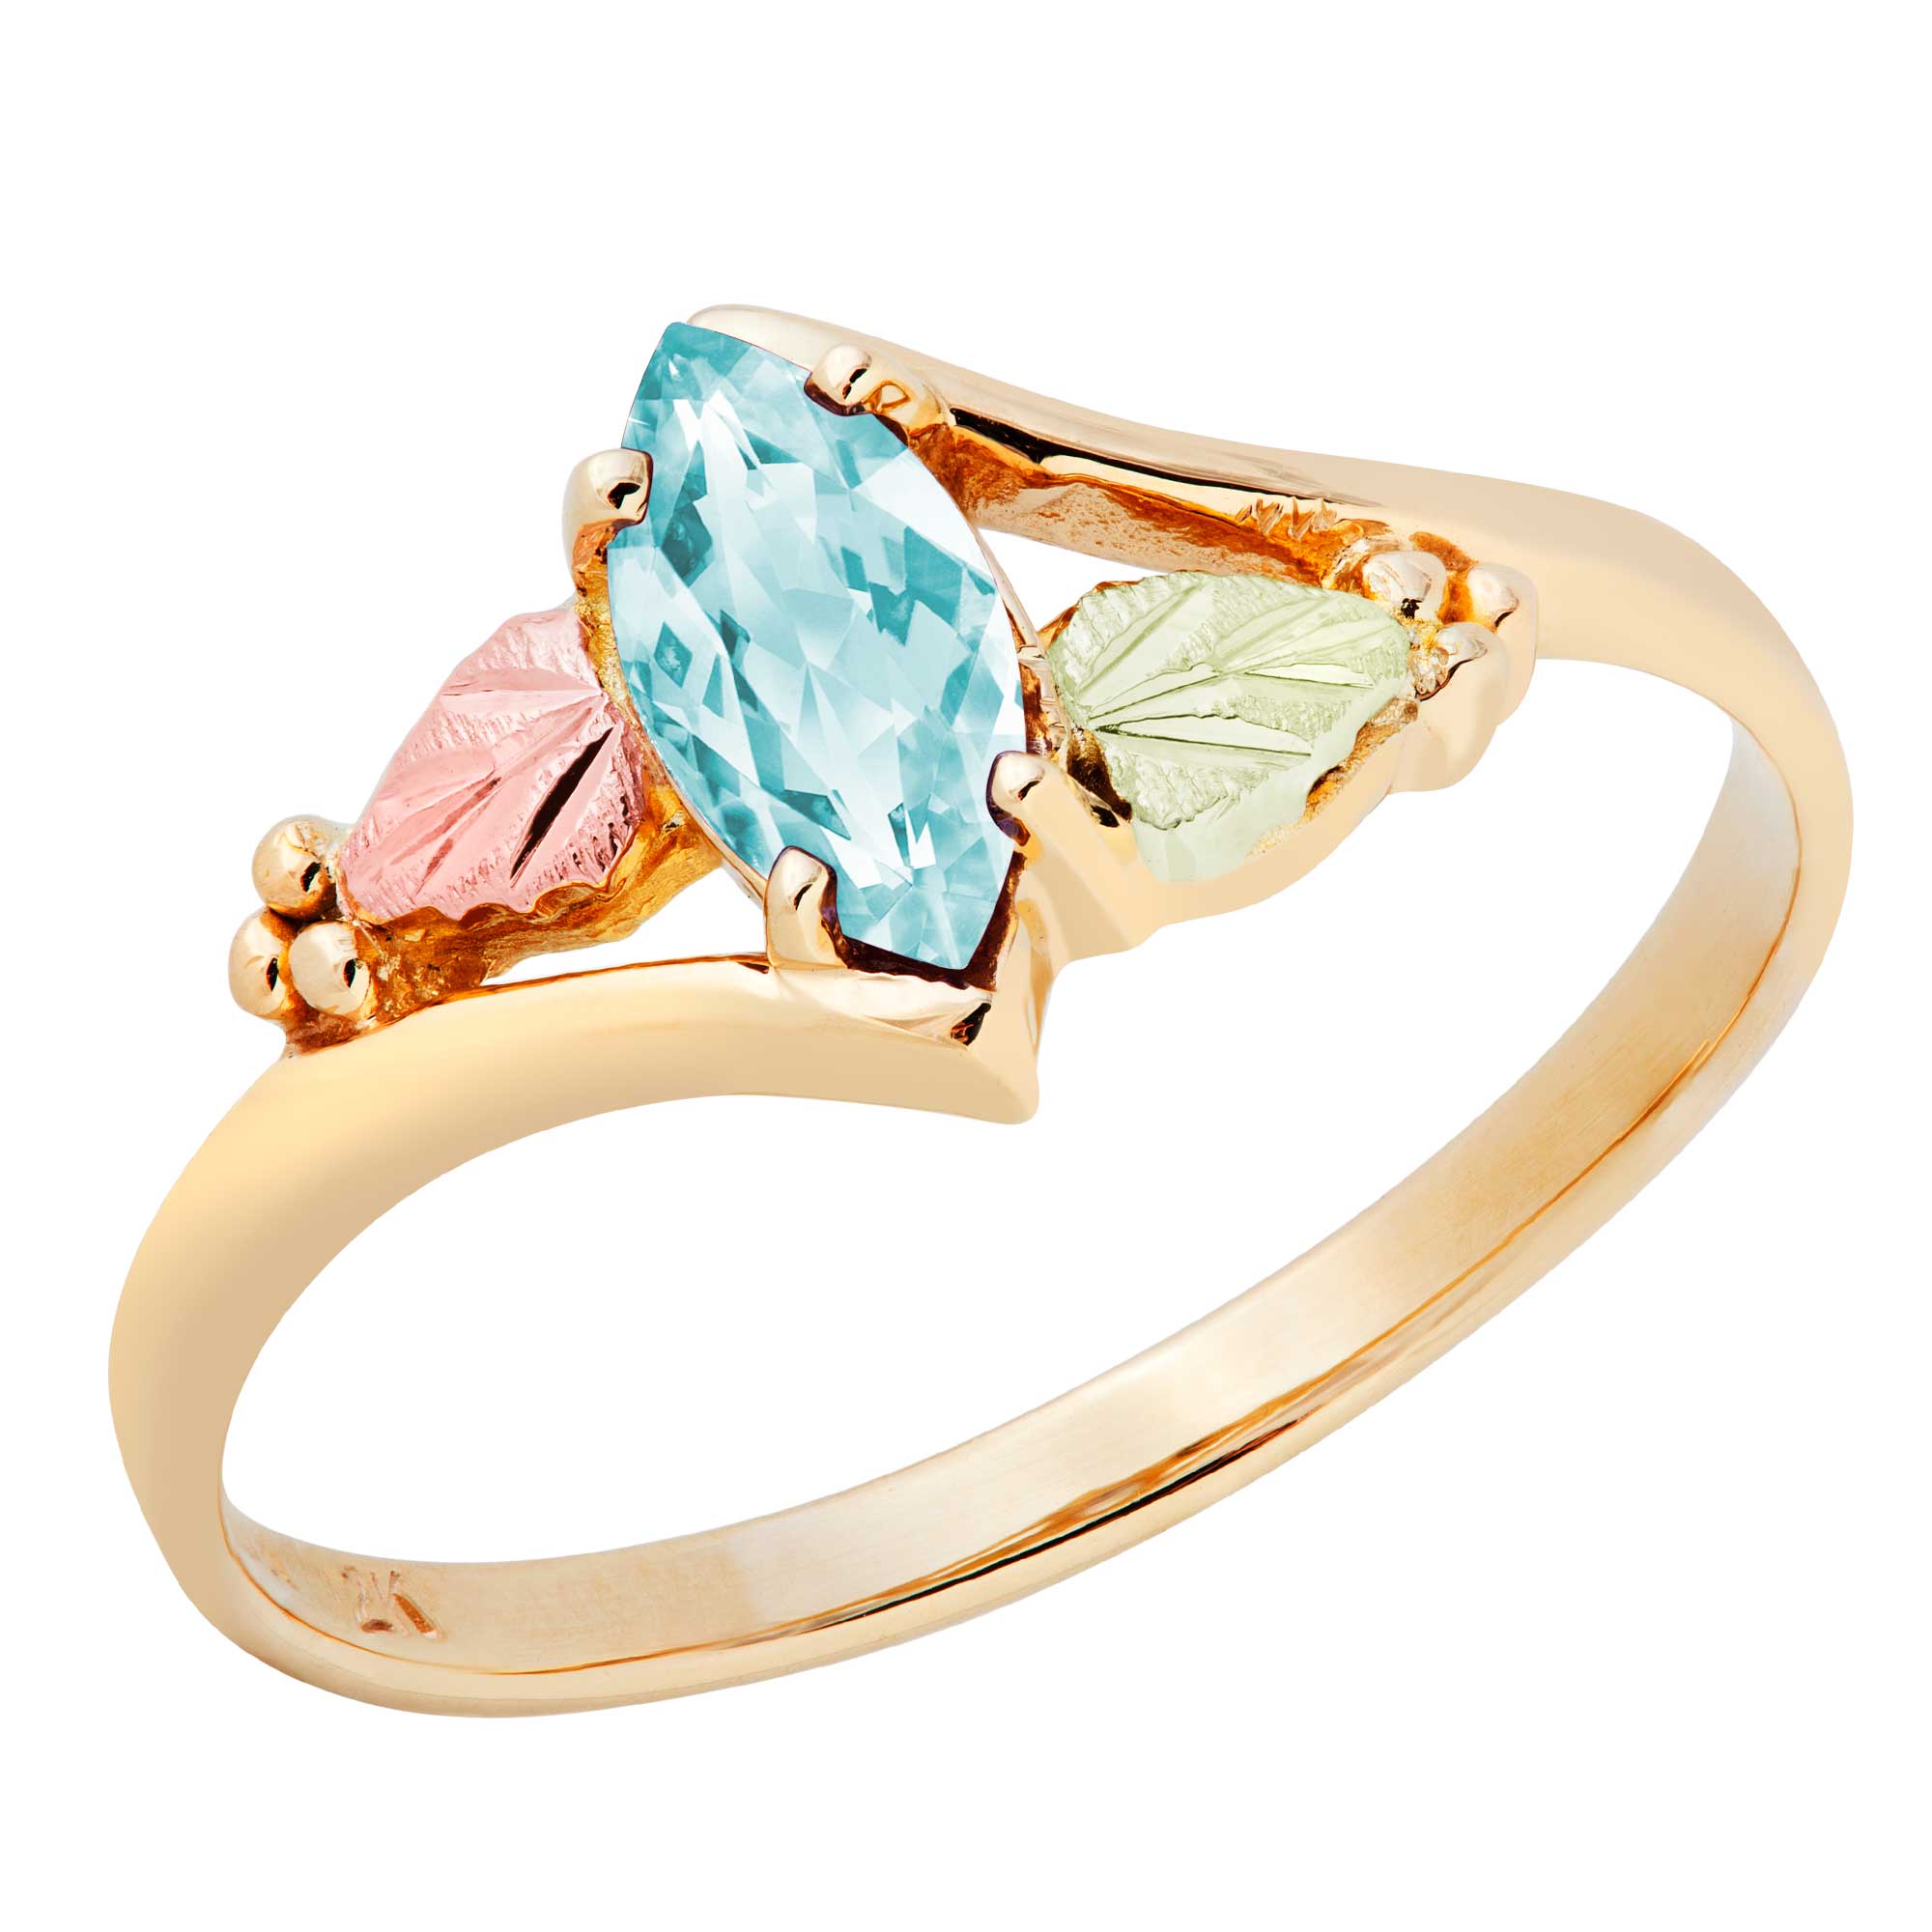 Created Aquamarine Marquise March Birthstone Bypass Ring, Black Hills Gold motif. 